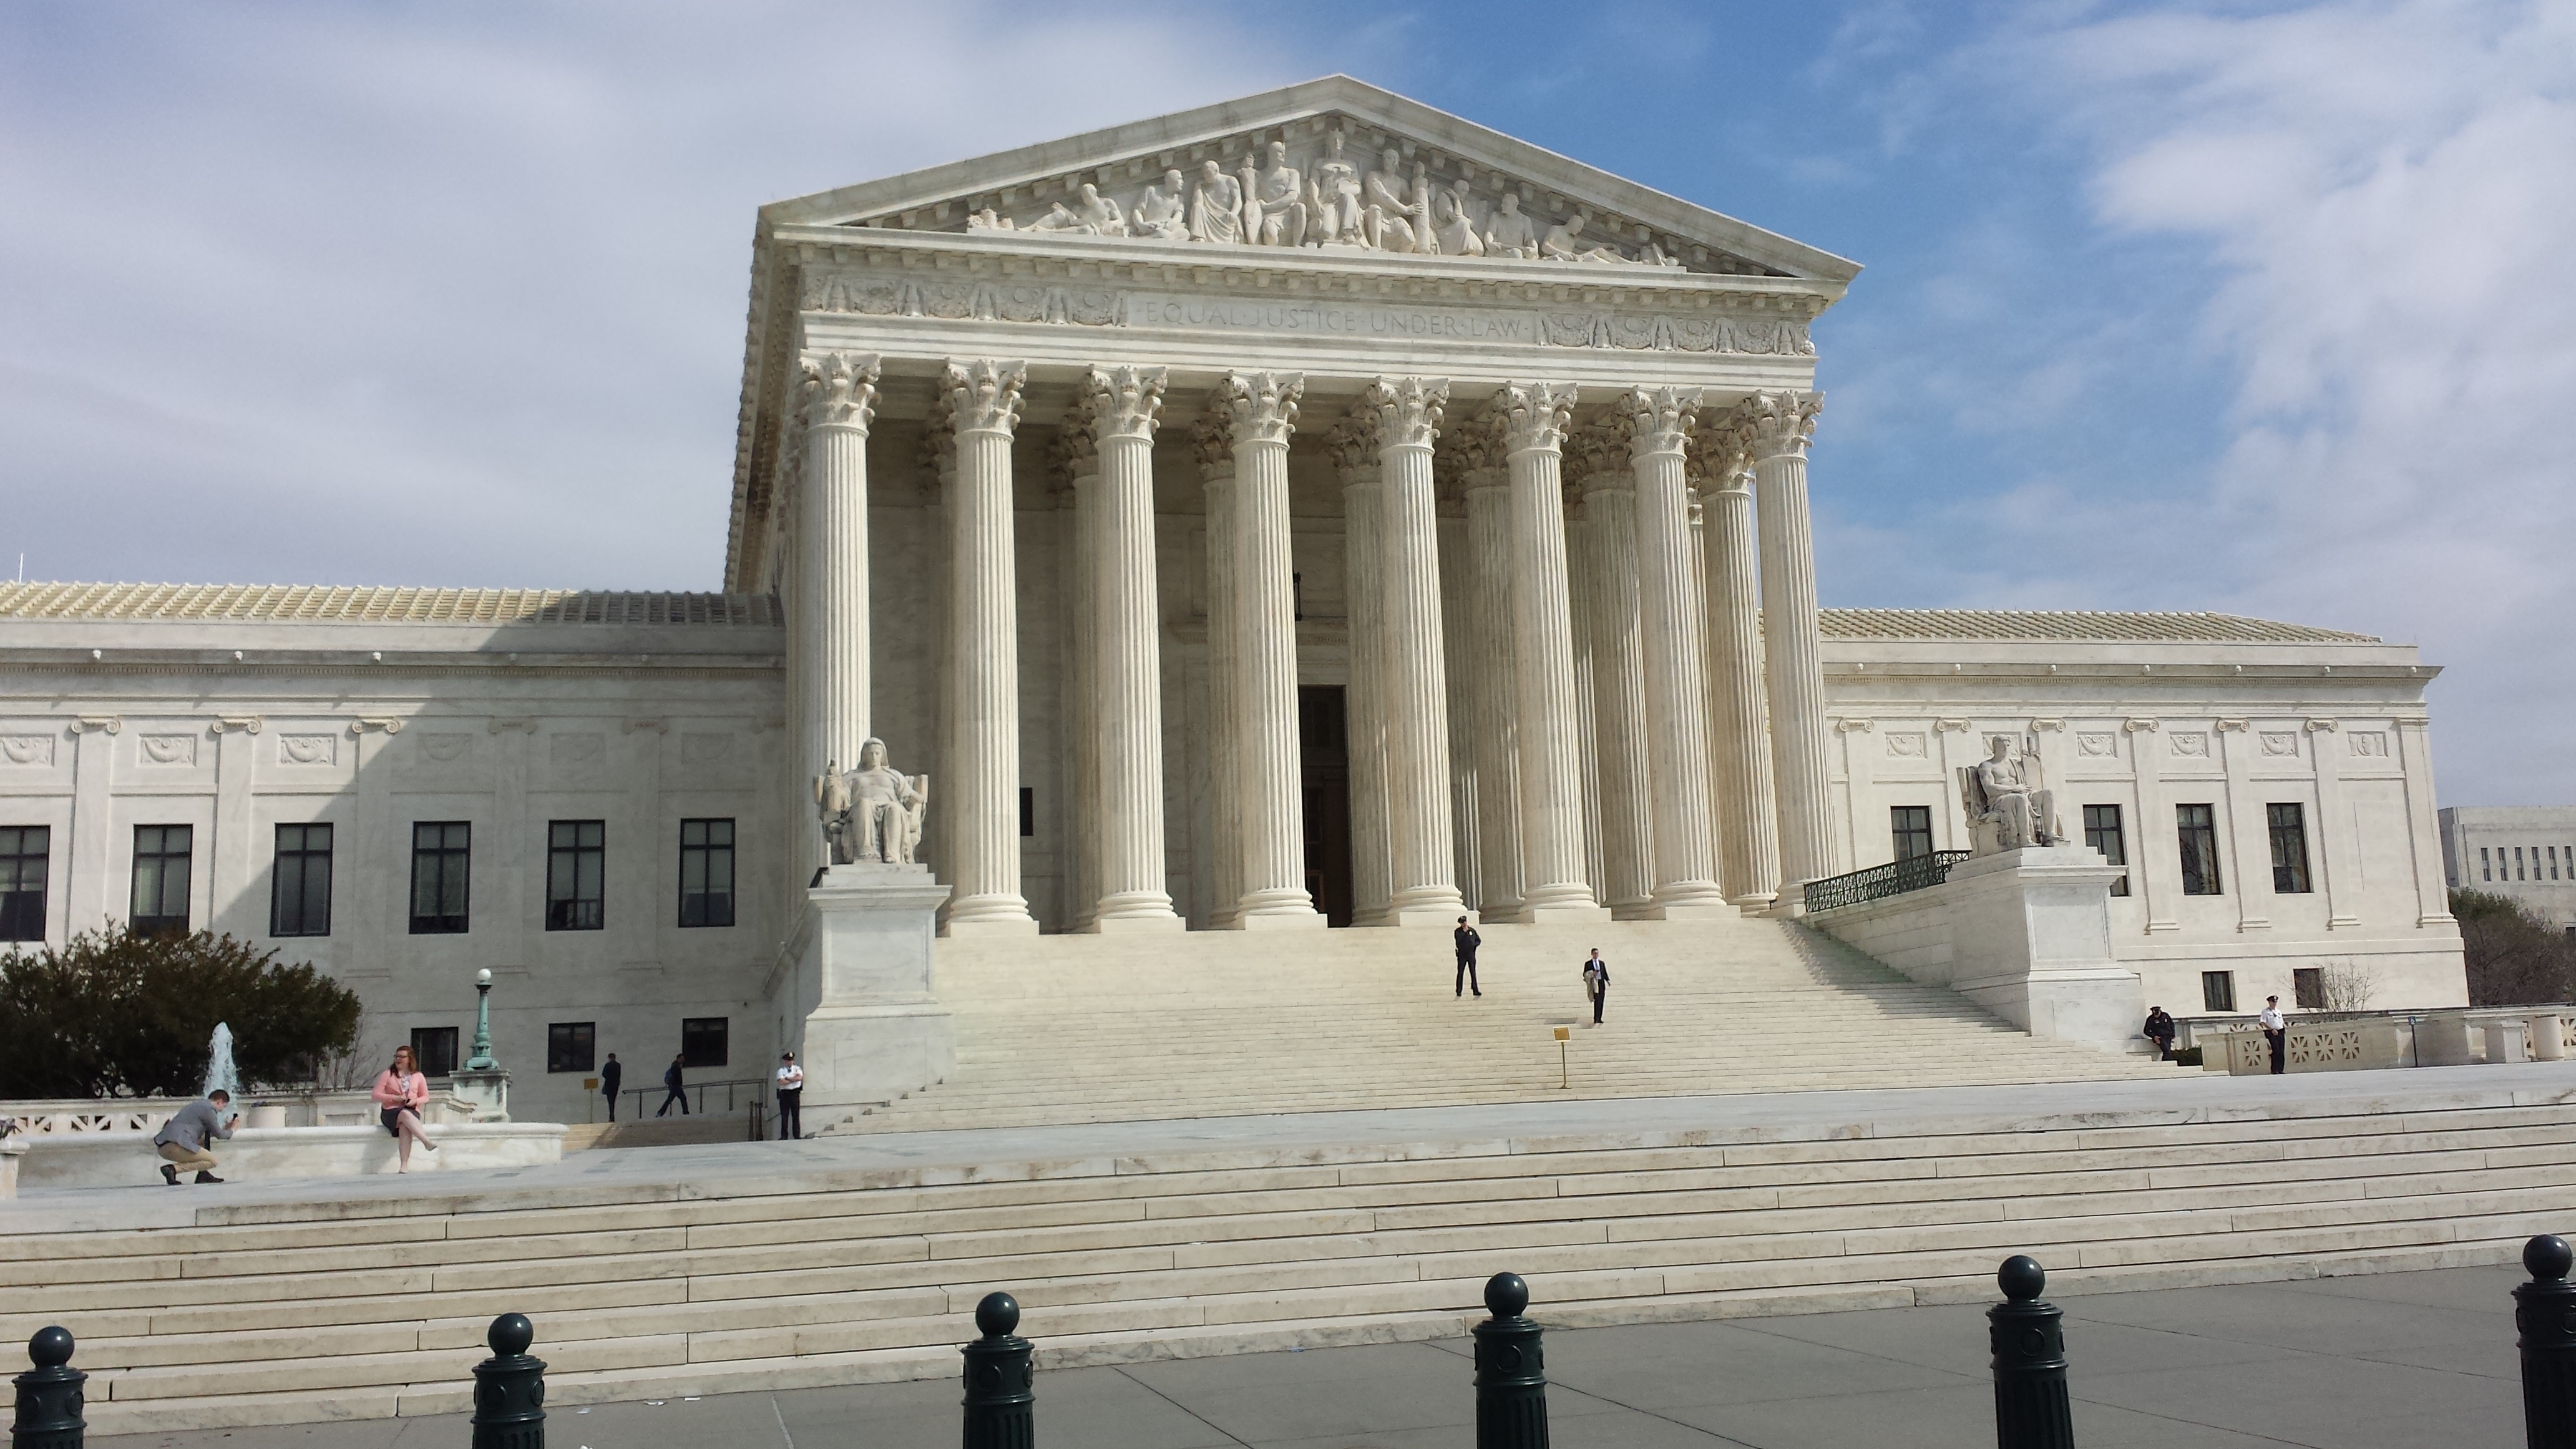 News Release – US Supreme Court Decision is Irresponsible